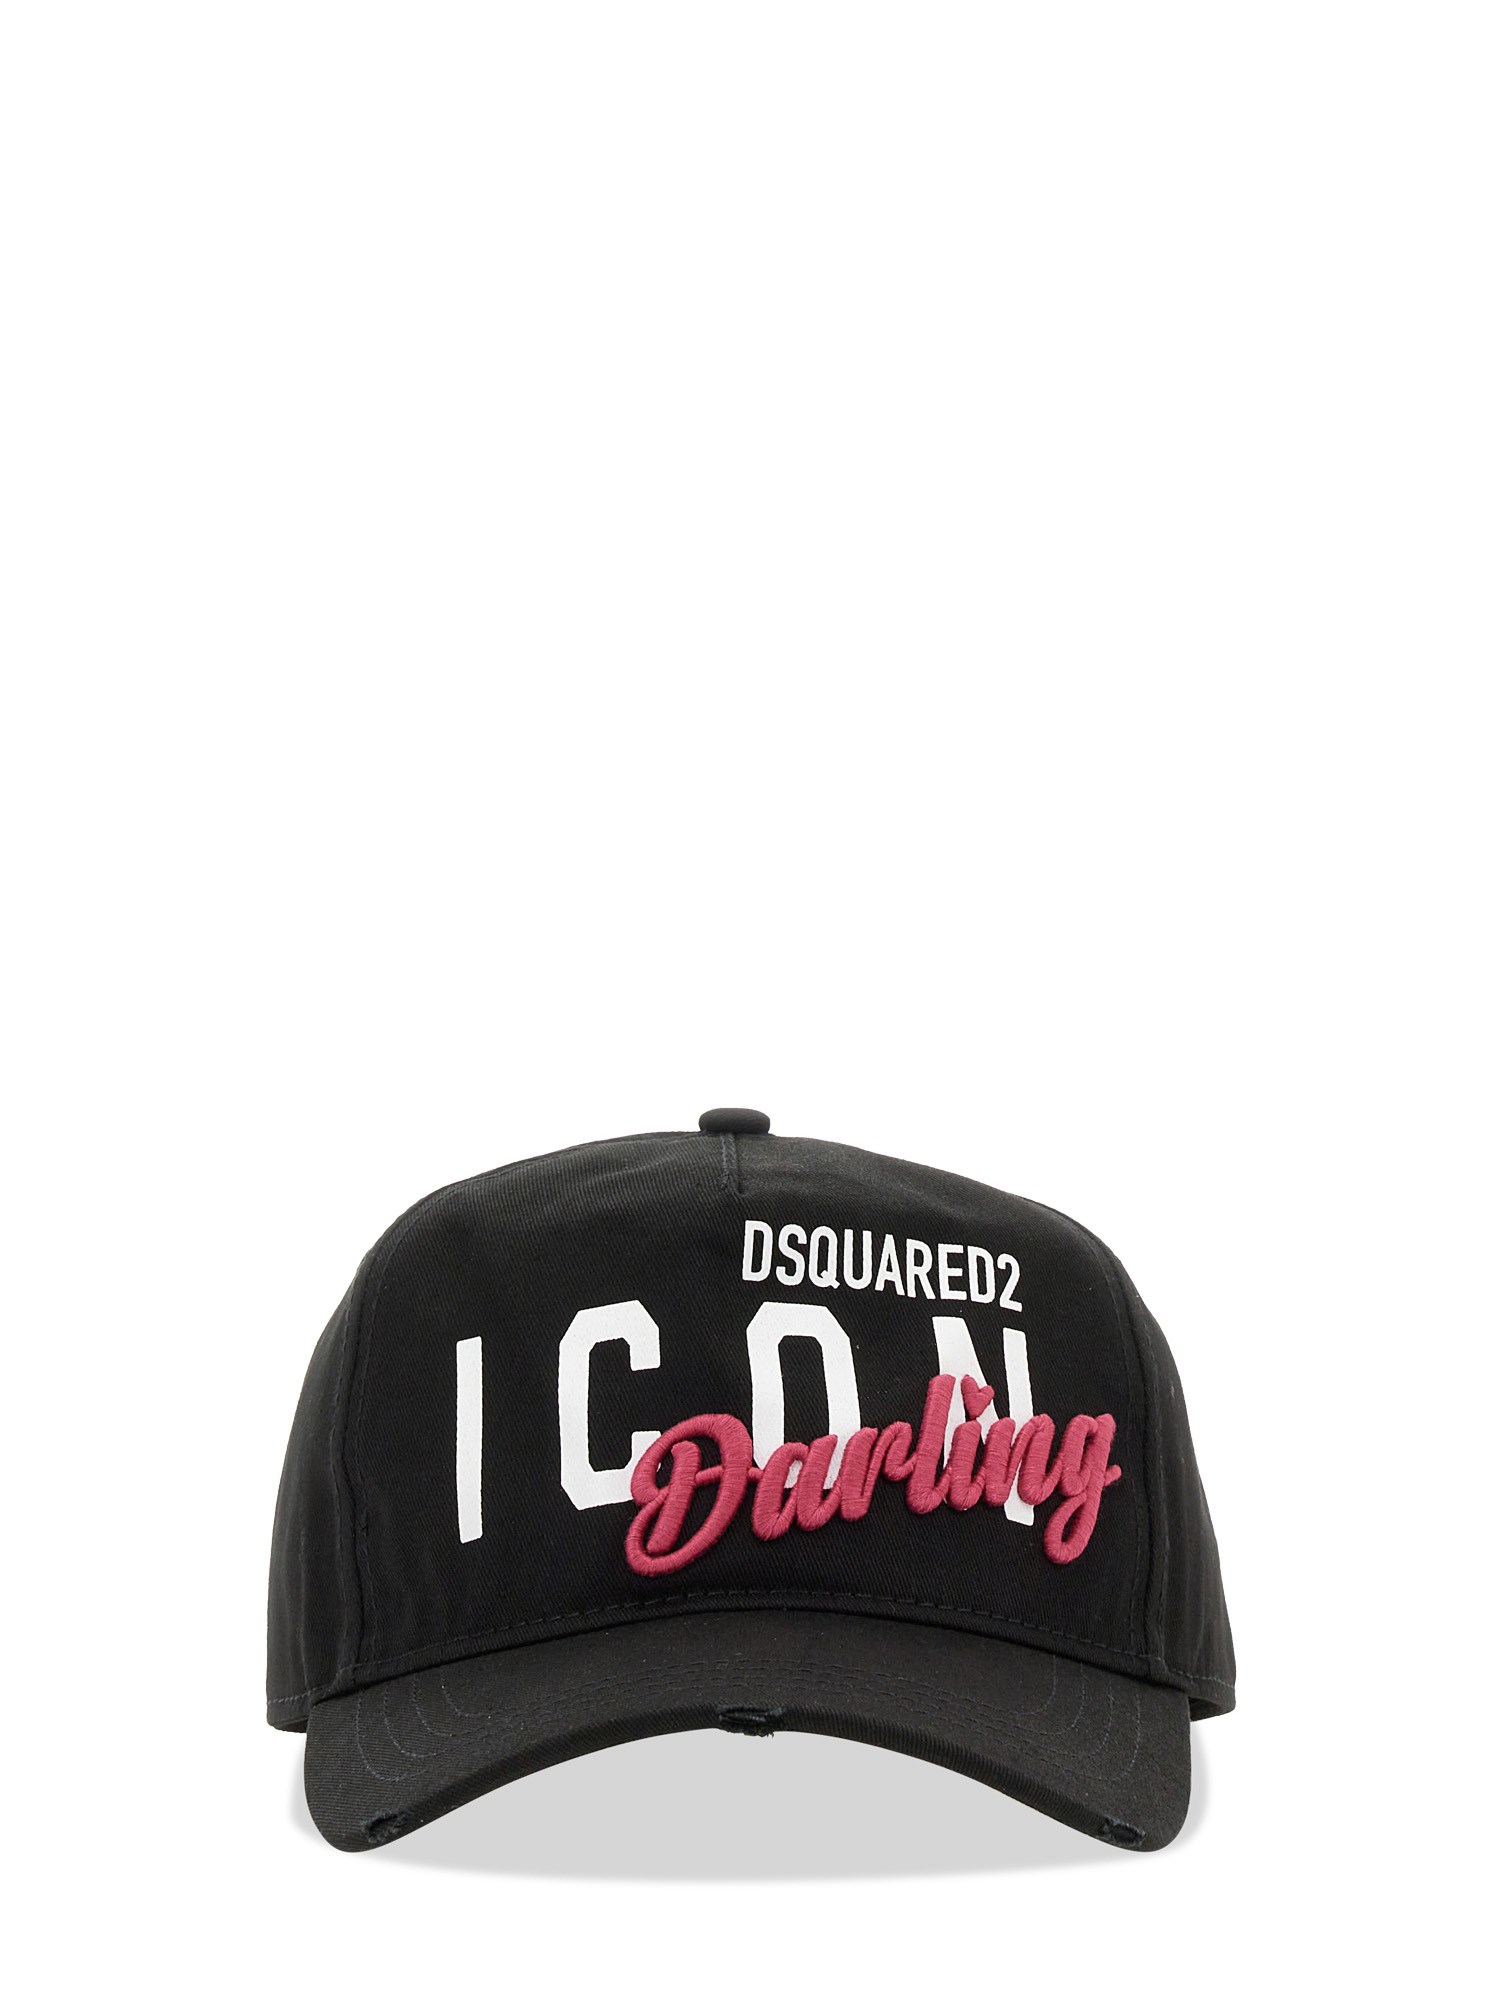 dsquared baseball hat with d2 patch